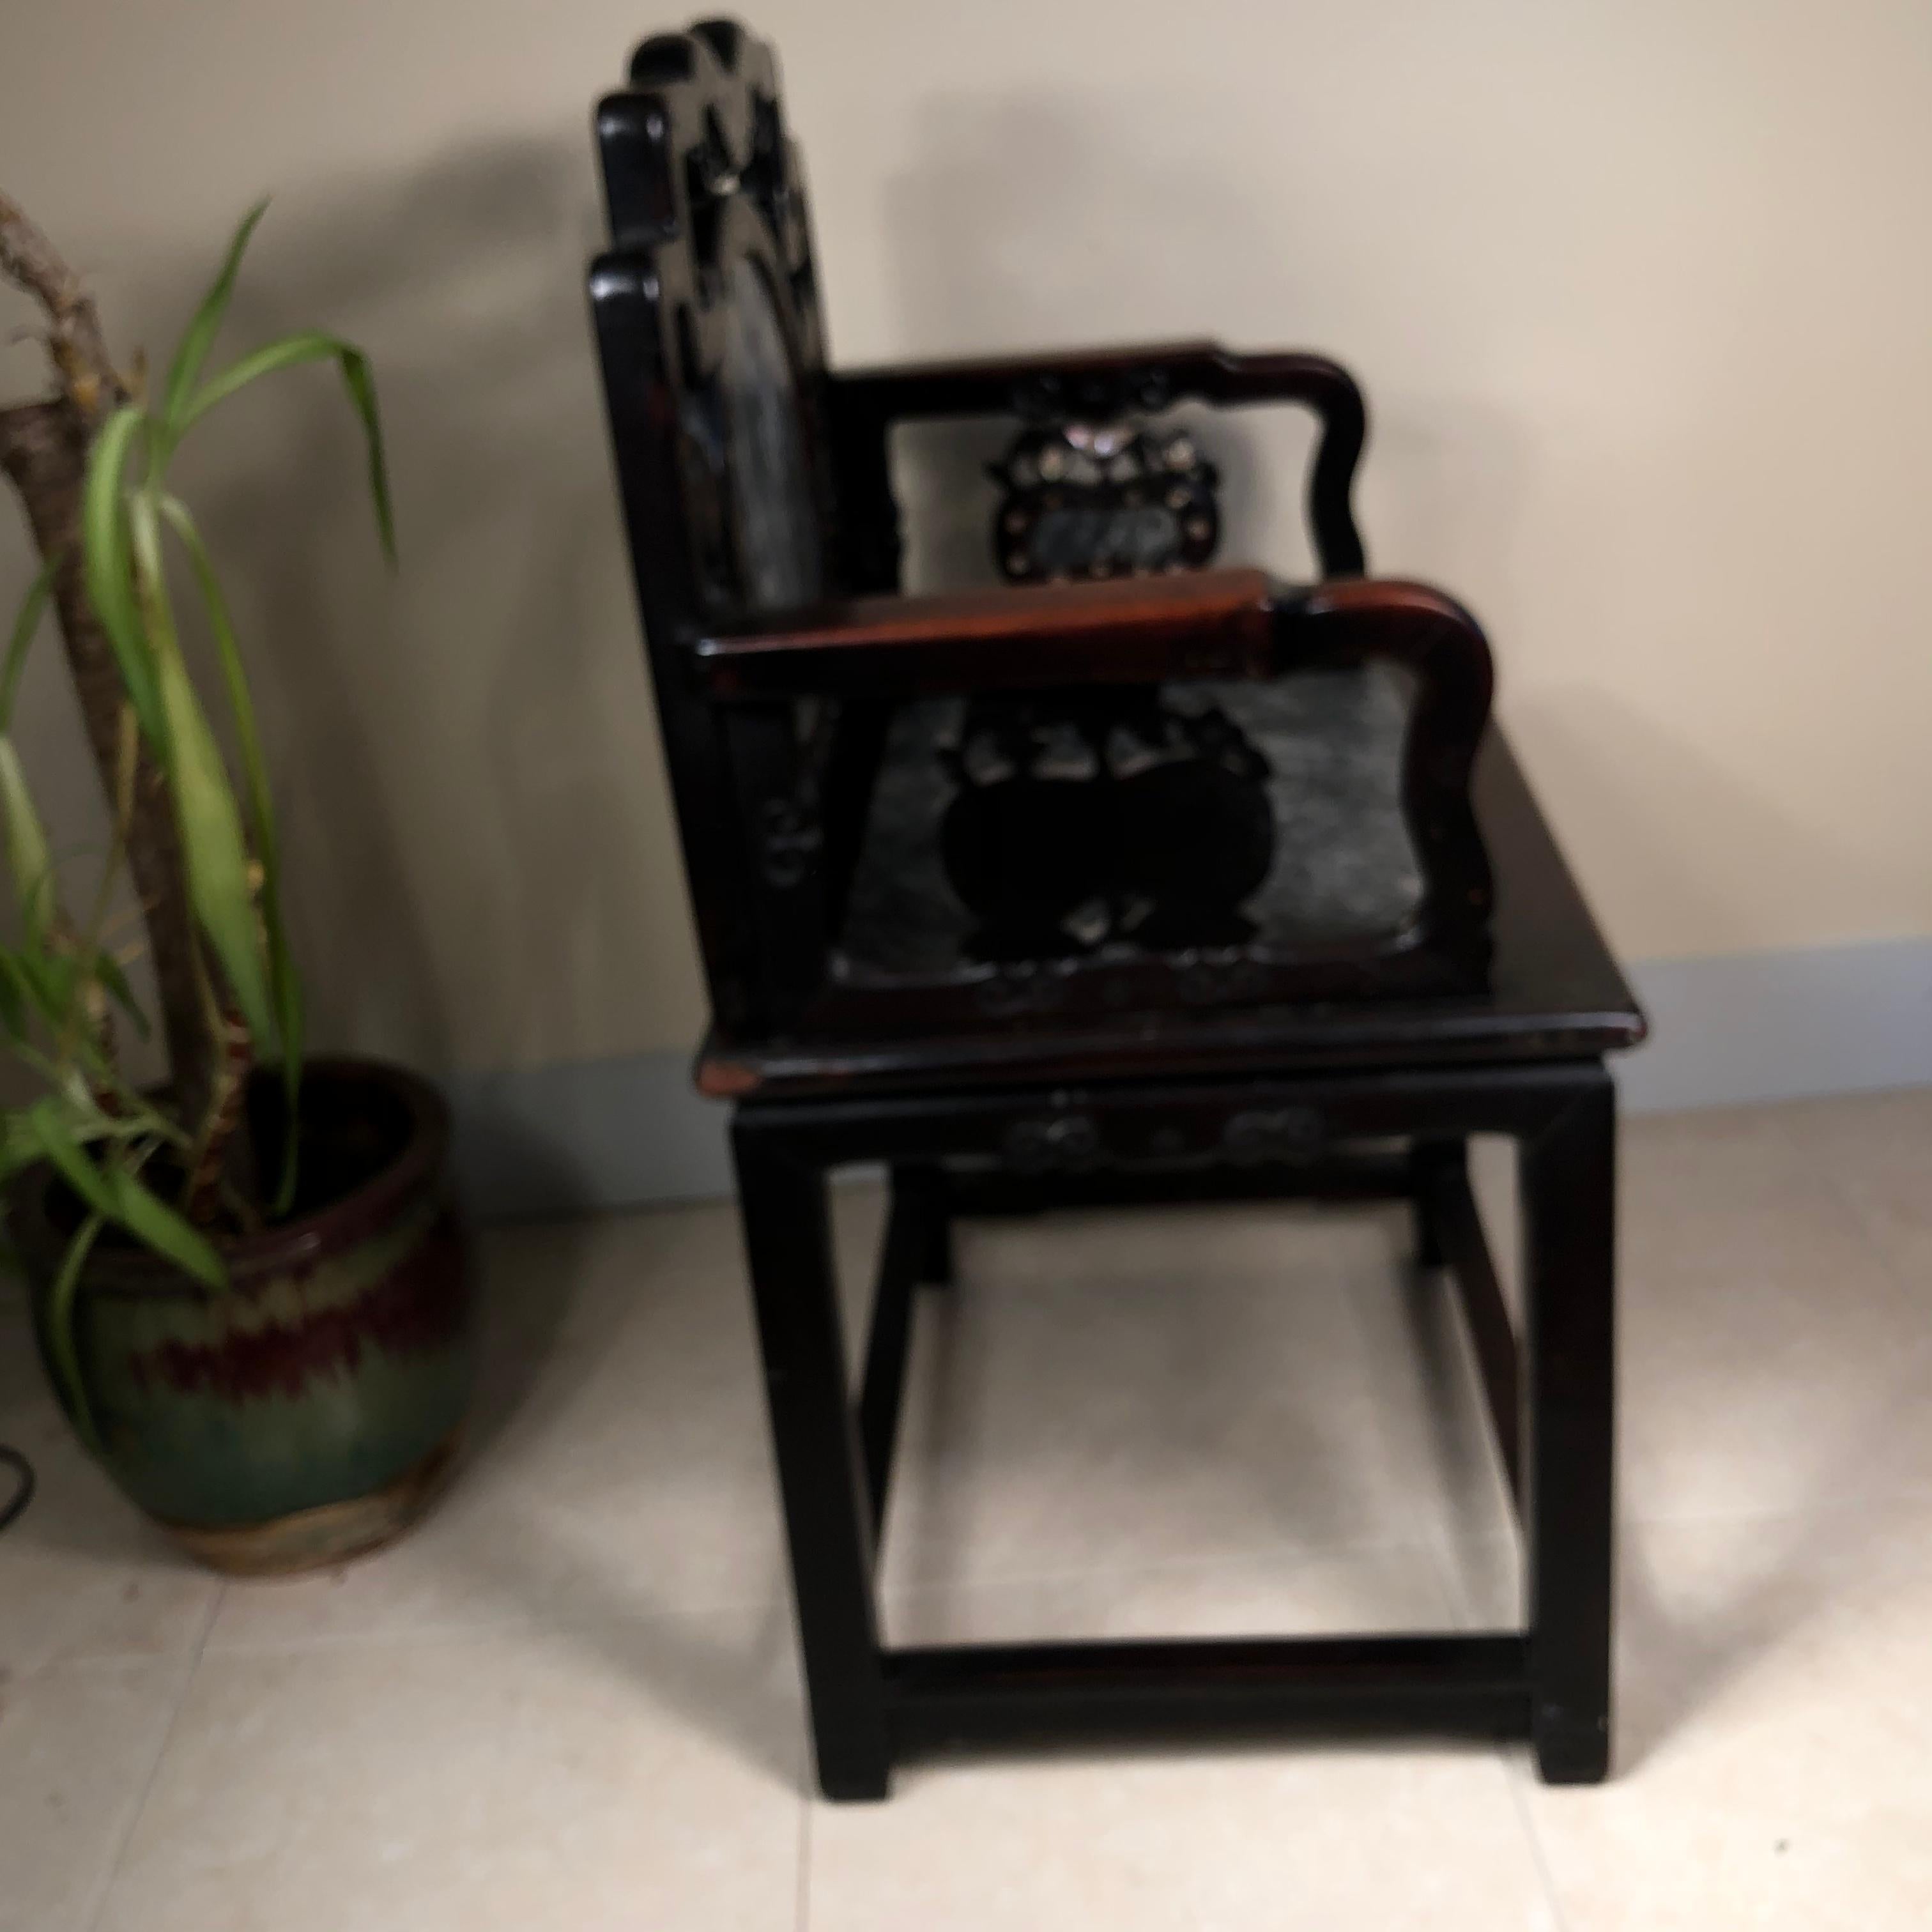 China Finest Antique Dream Stone And Mother Pearl  Inlaid Chair  en vente 1